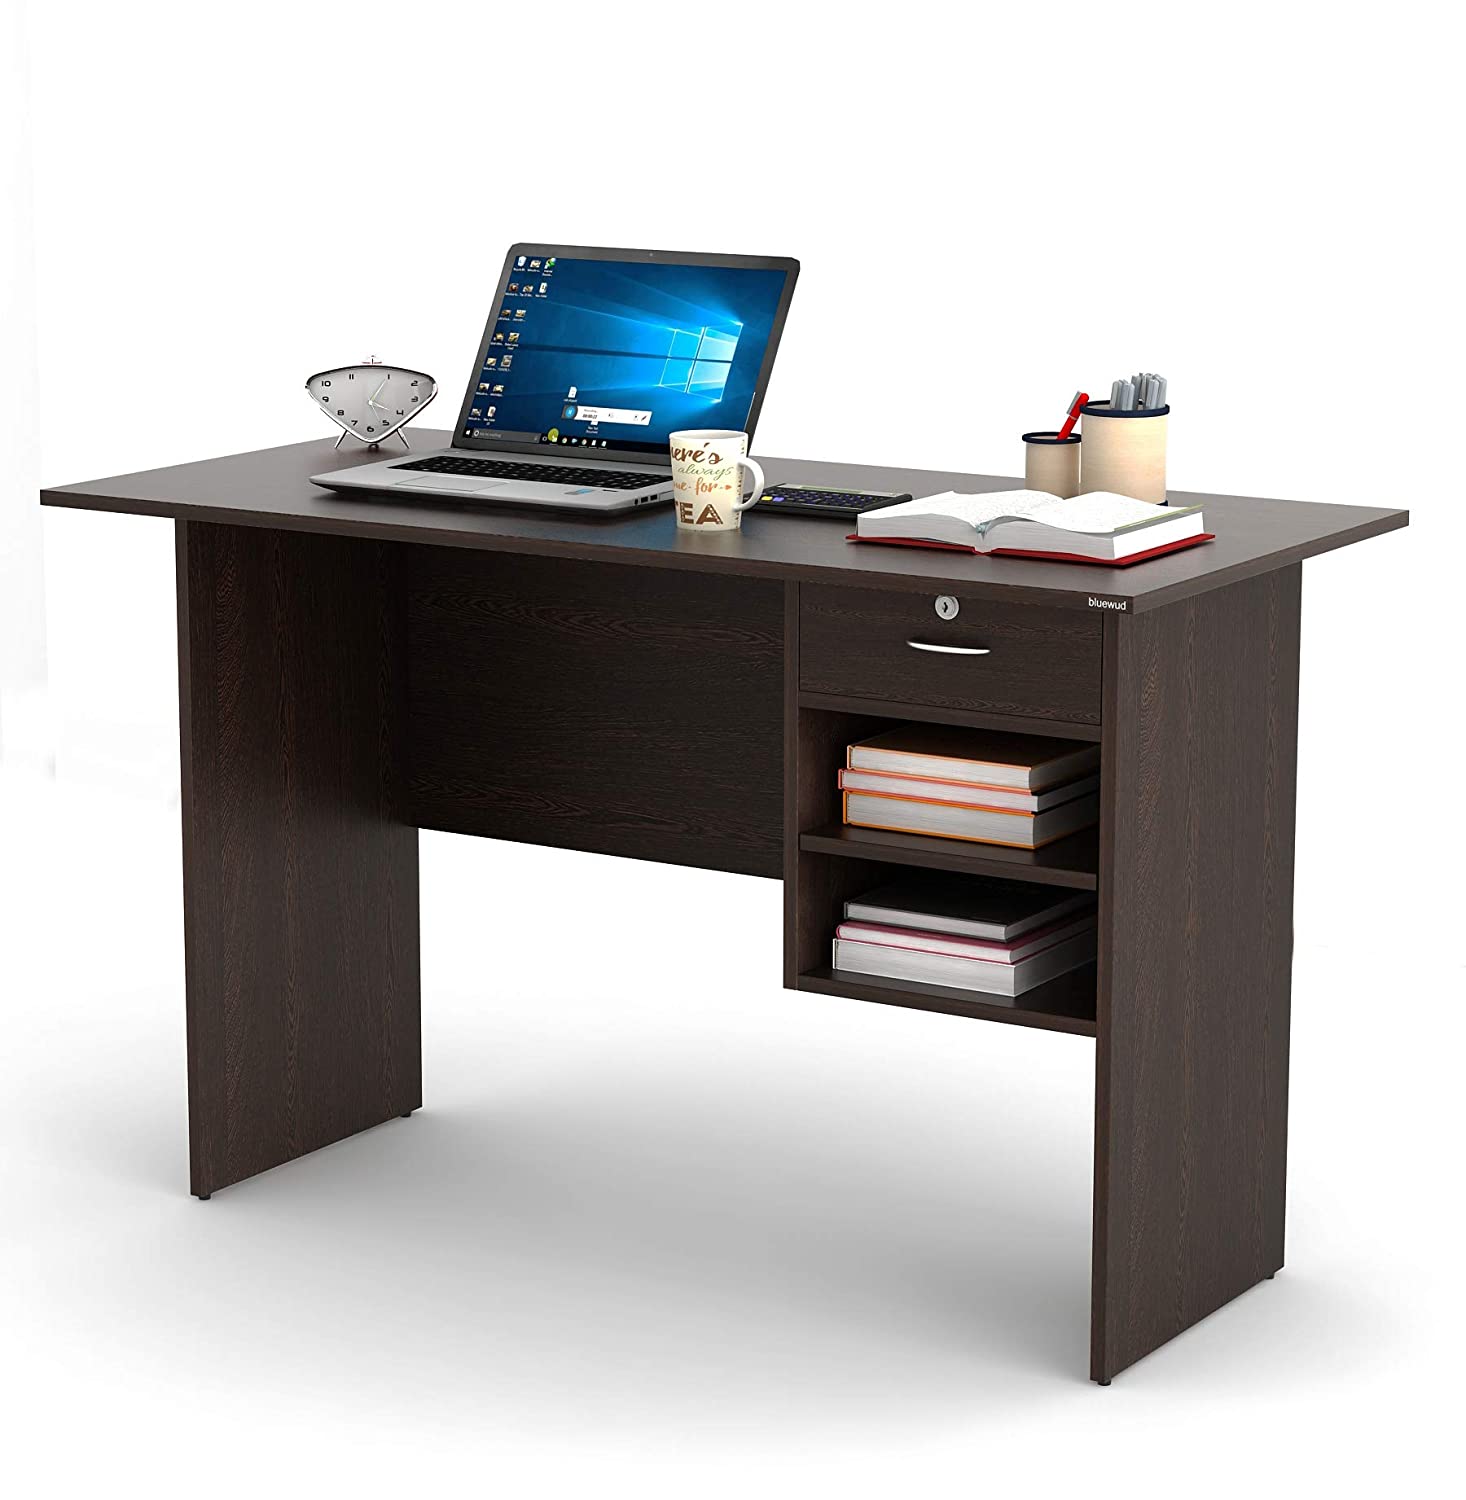 Study Table: Leon Study Table Desk for Home & Office (Wenge)